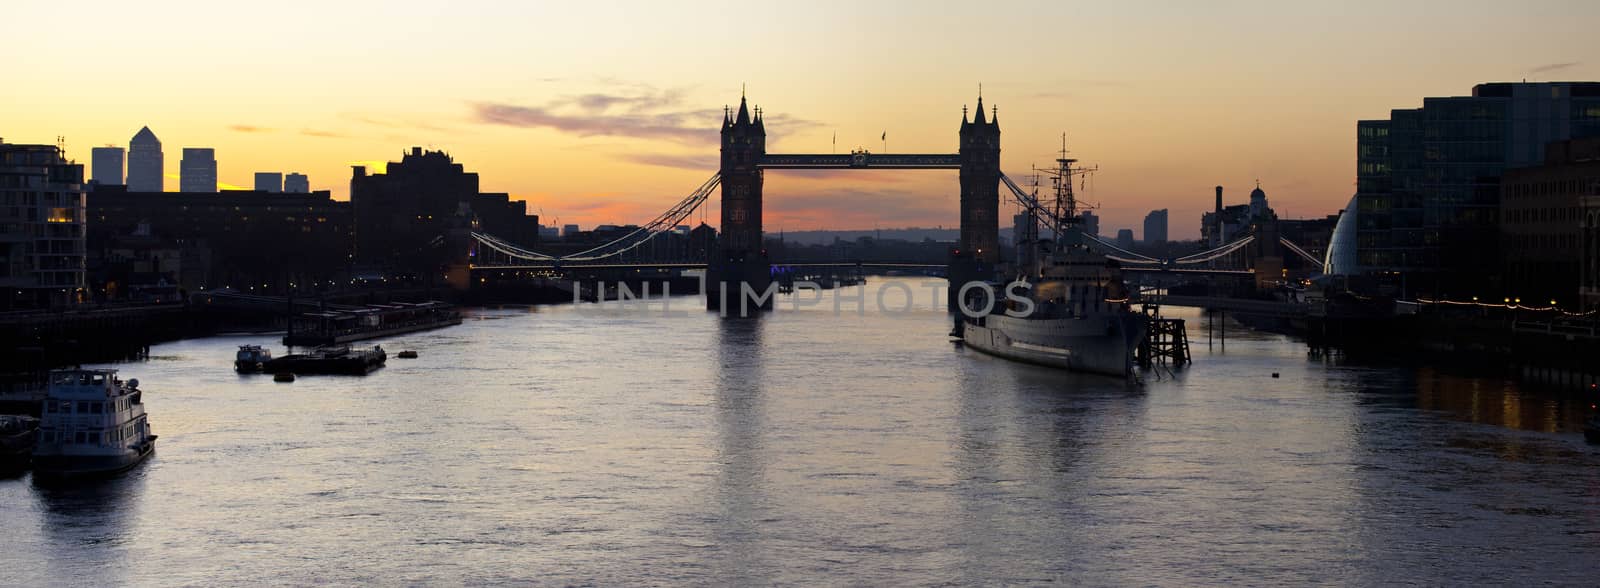 A panoramic view of a London Sunrise taking in the sights of the river Thames, Tower Bridge, HMS Belfast and Docklands.